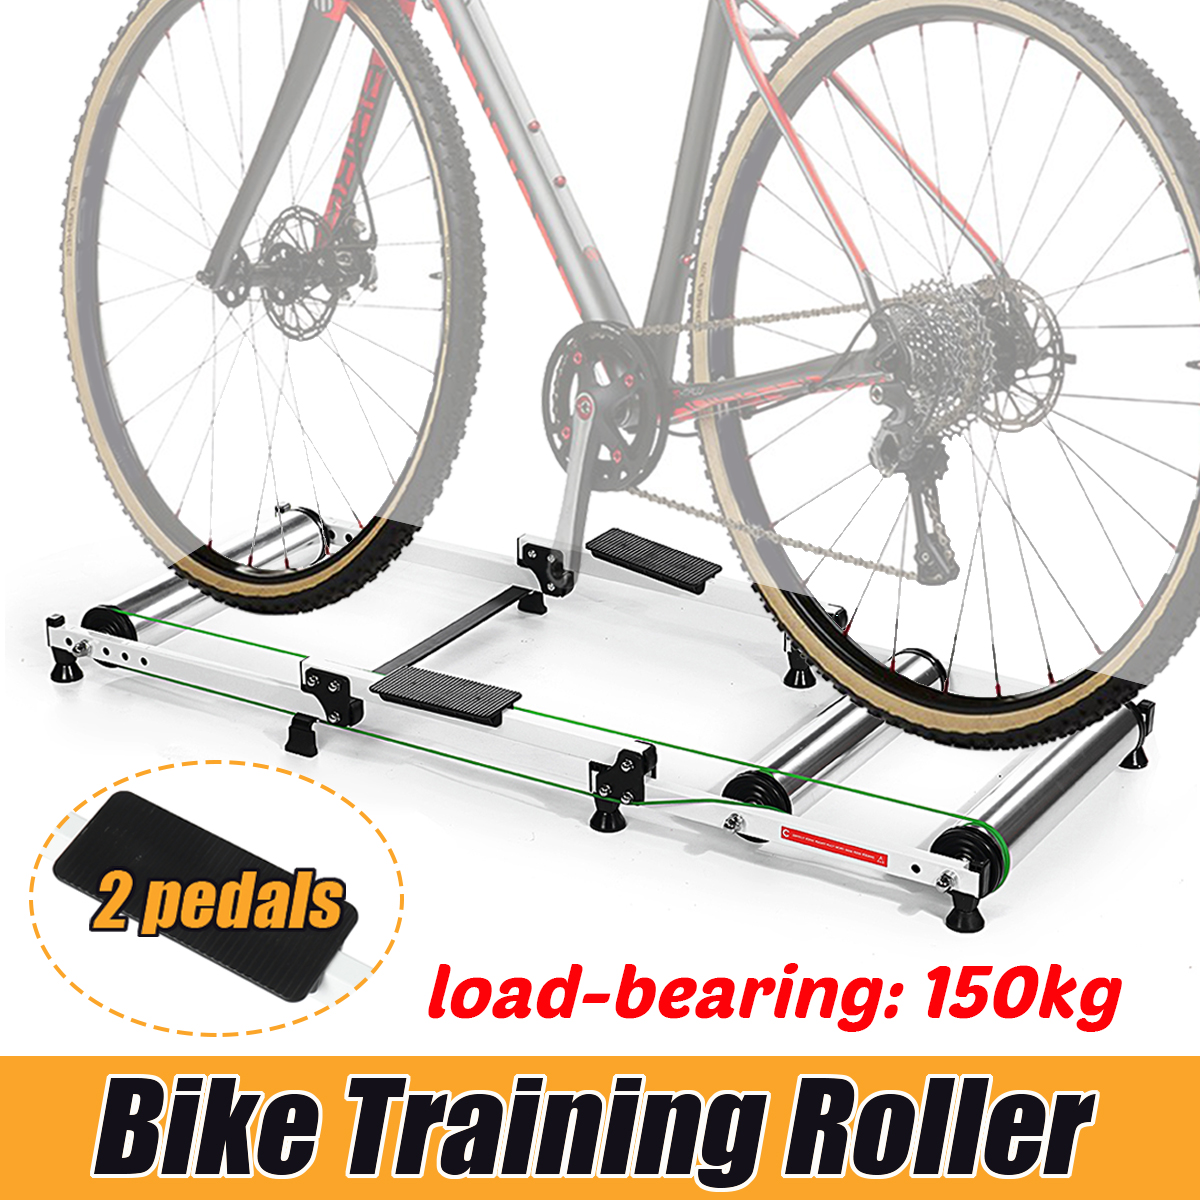 Riding-Bike-Trainer-Roller-Training-Bicycle-Indoor-Cycling-Platform-Home-Gym-1748313